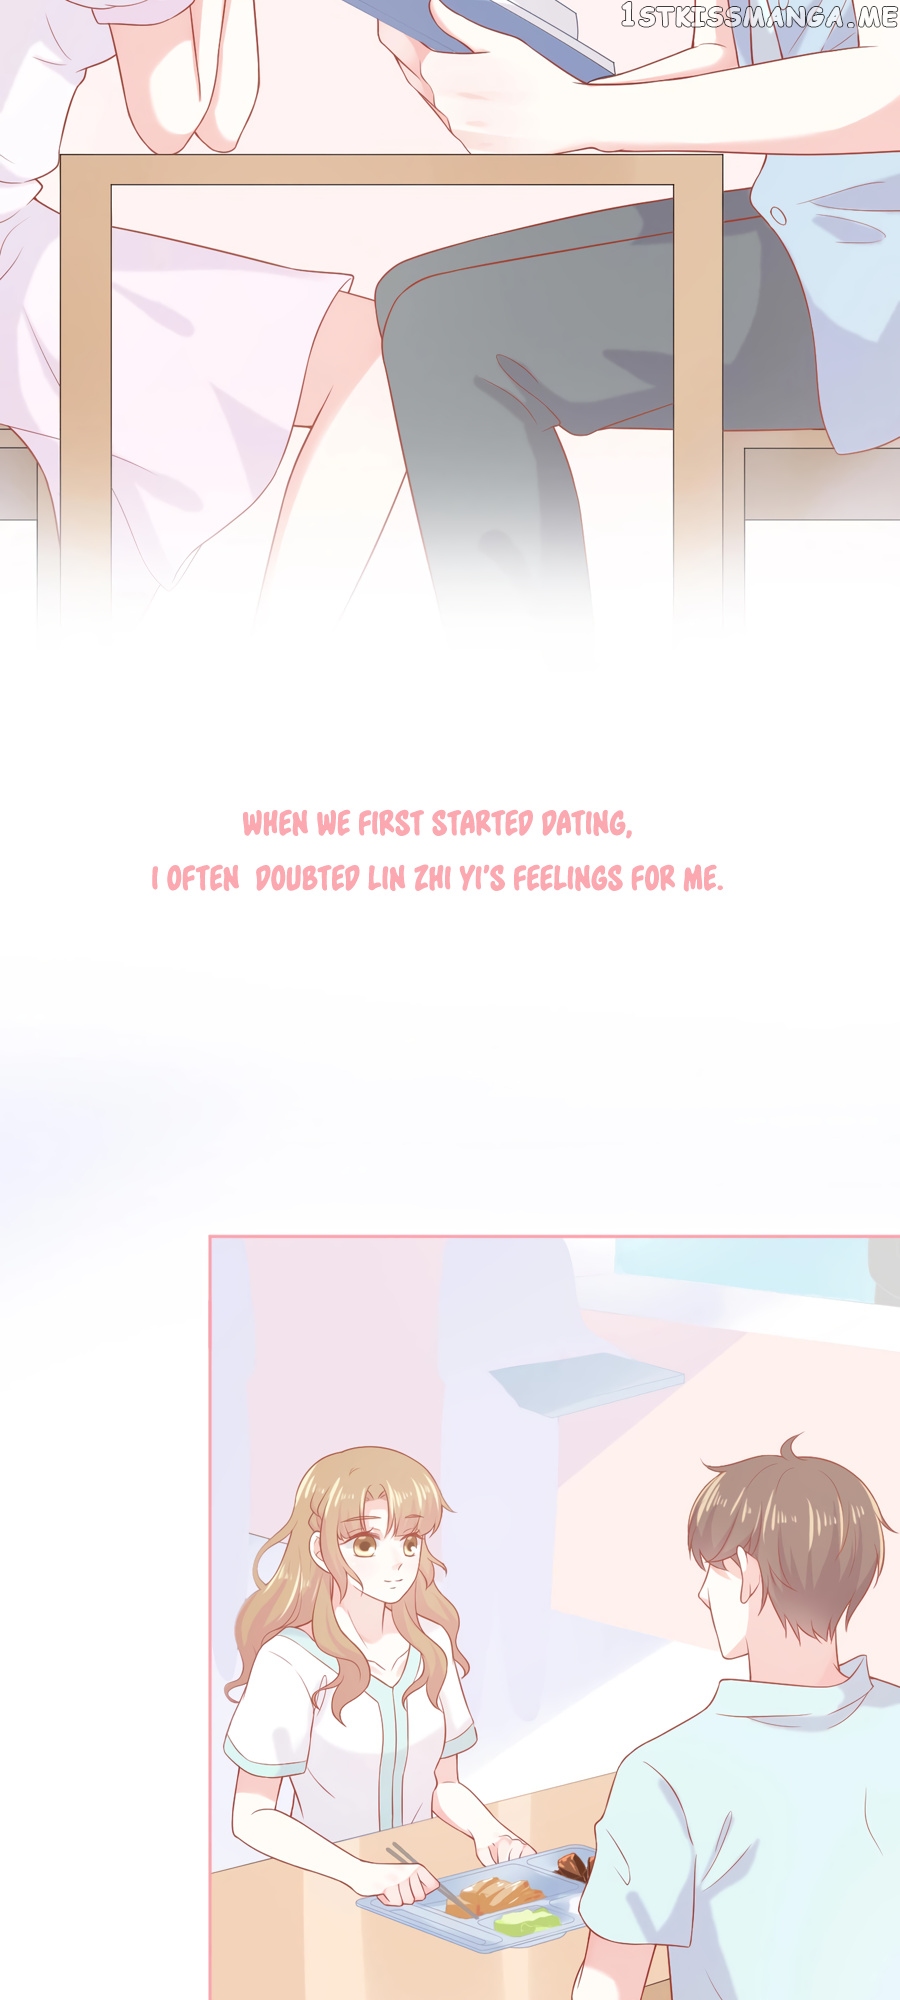 Being With You Means The World To Me chapter 8 - page 14